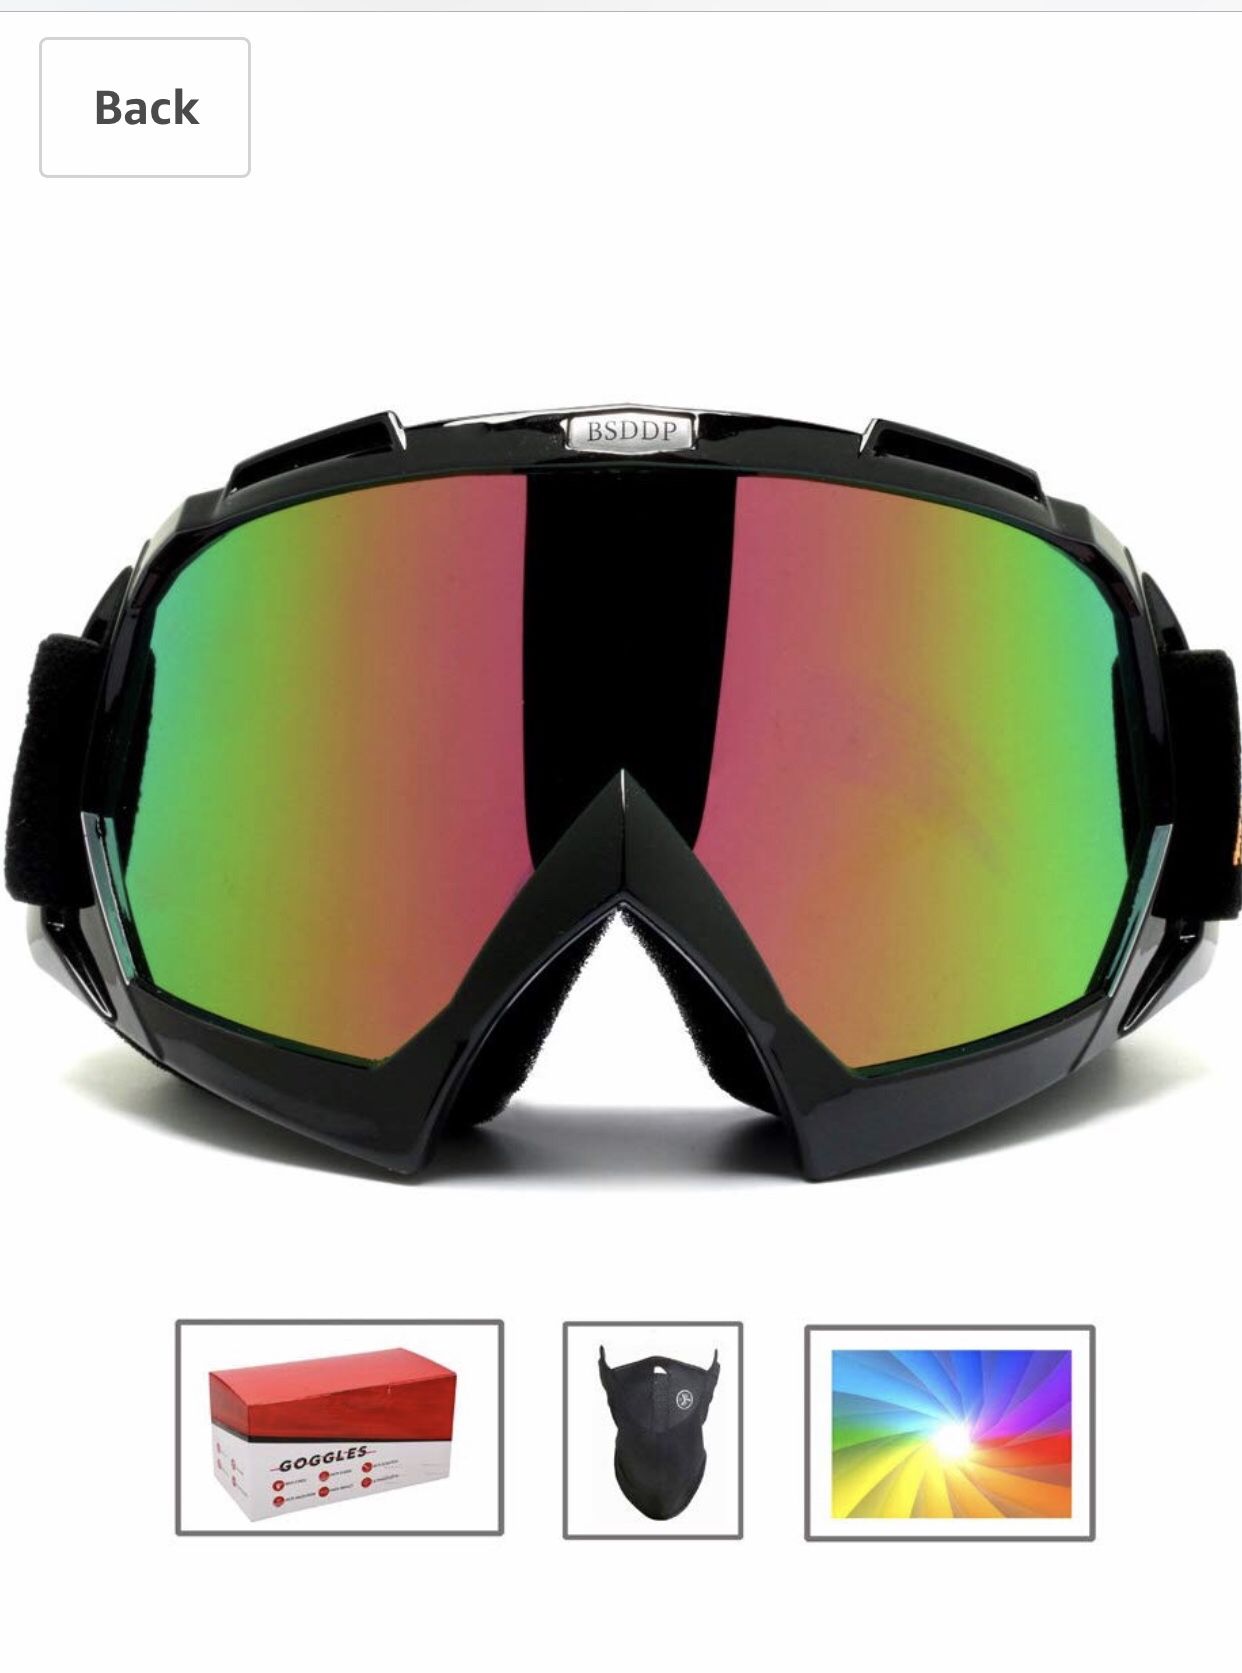 Feier Yusi Adult Professional Ski Goggles Snowmobile Snowboard Skate Snow Skiing Goggles with 100% UV400 Protection Bright Lens TPC Frame Material An